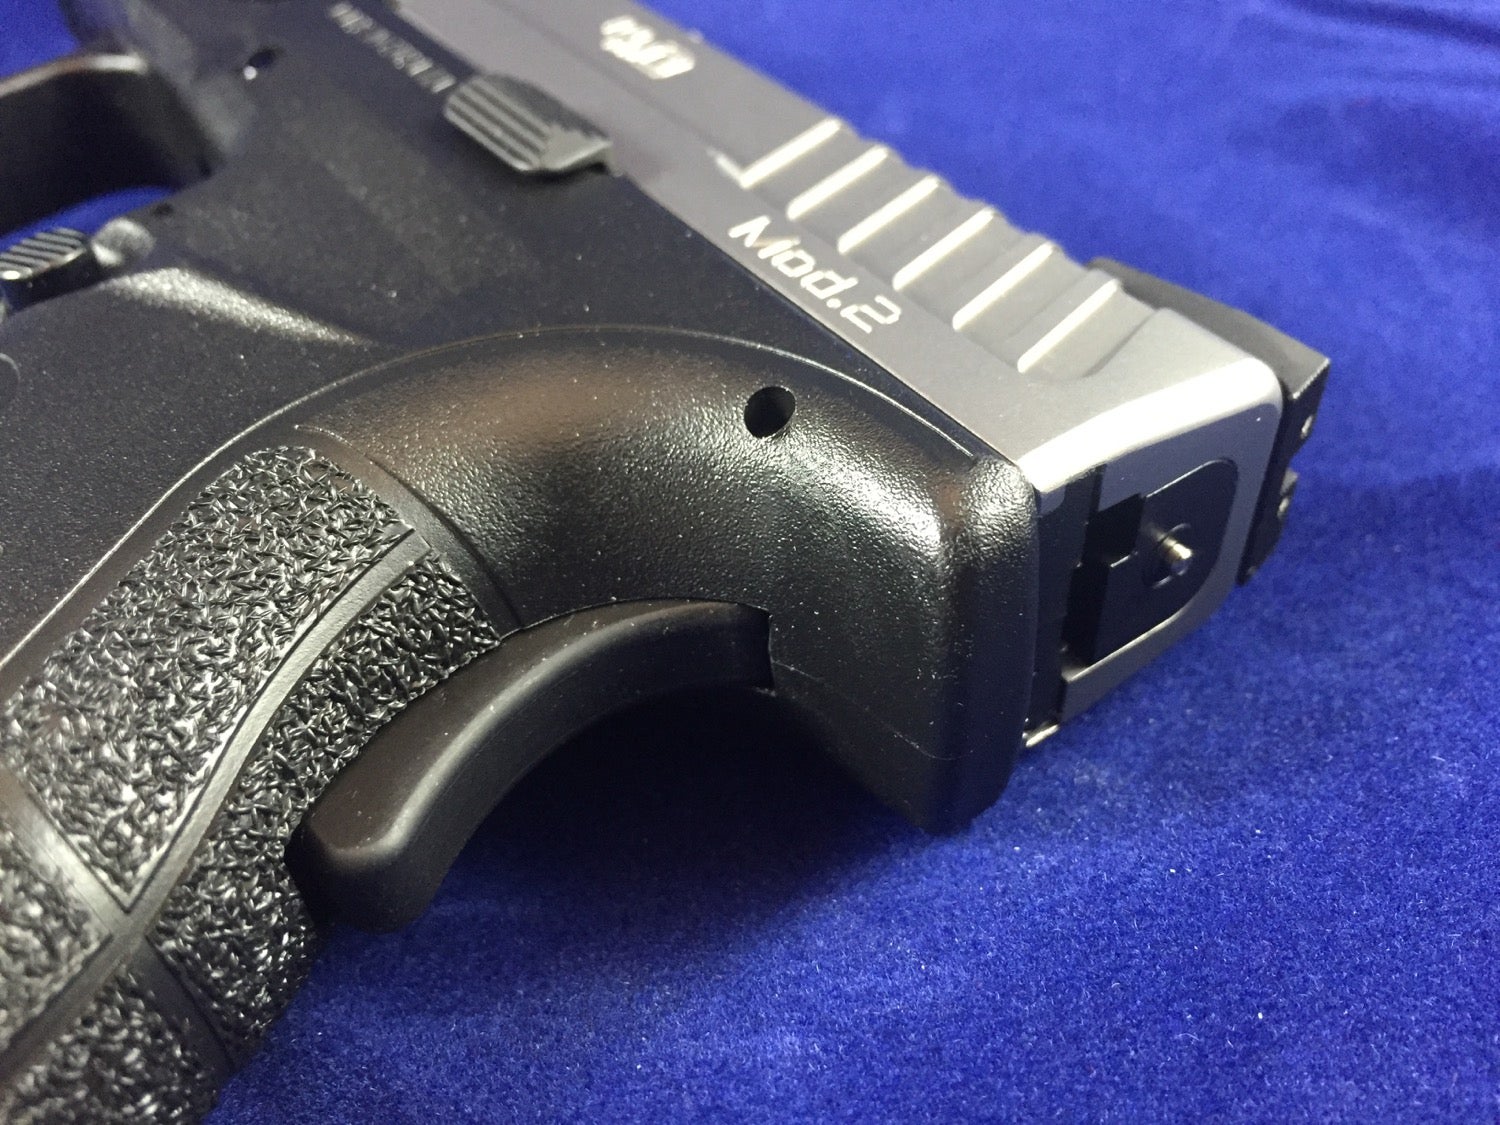 Rear grip safety and striker status indicator.